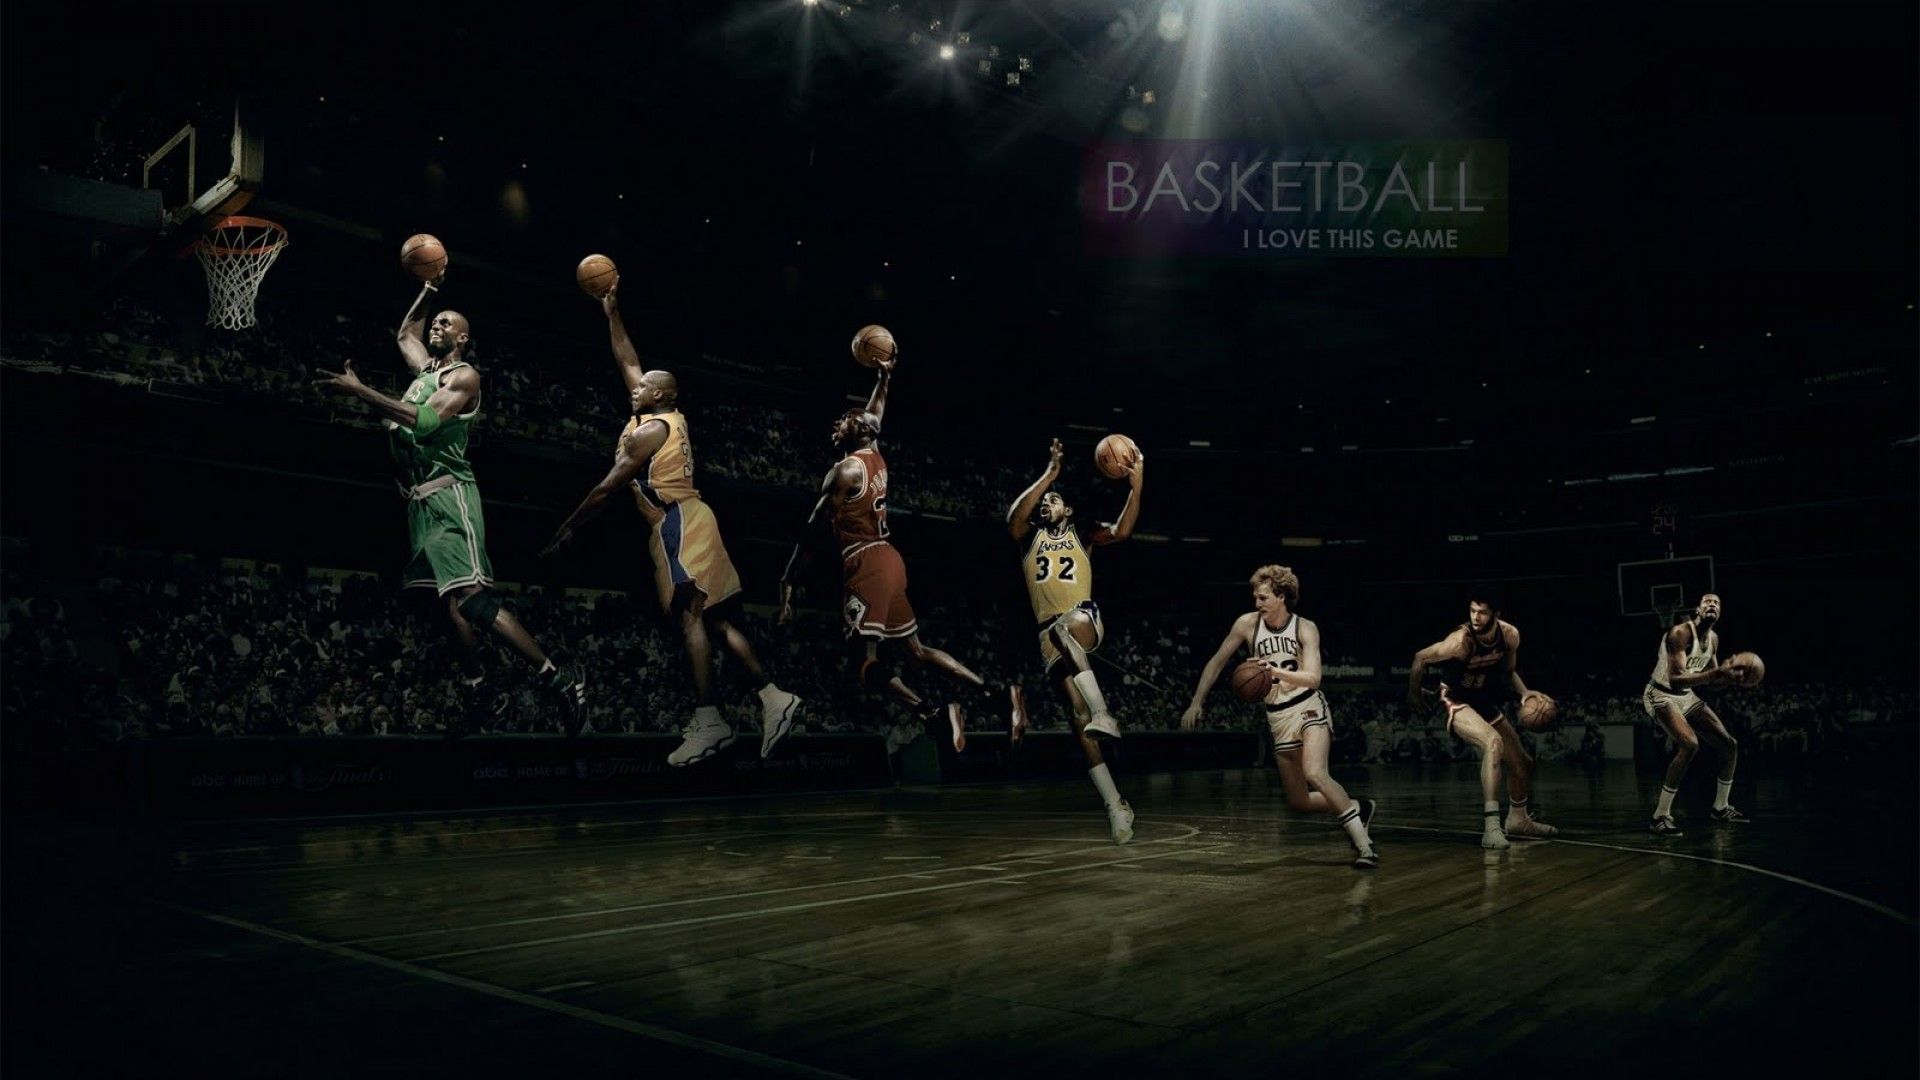 Basketball Games For PC Wallpaper Basketball Wallpaper. Basketball wallpaper, Basketball wallpaper hd, Basketball picture